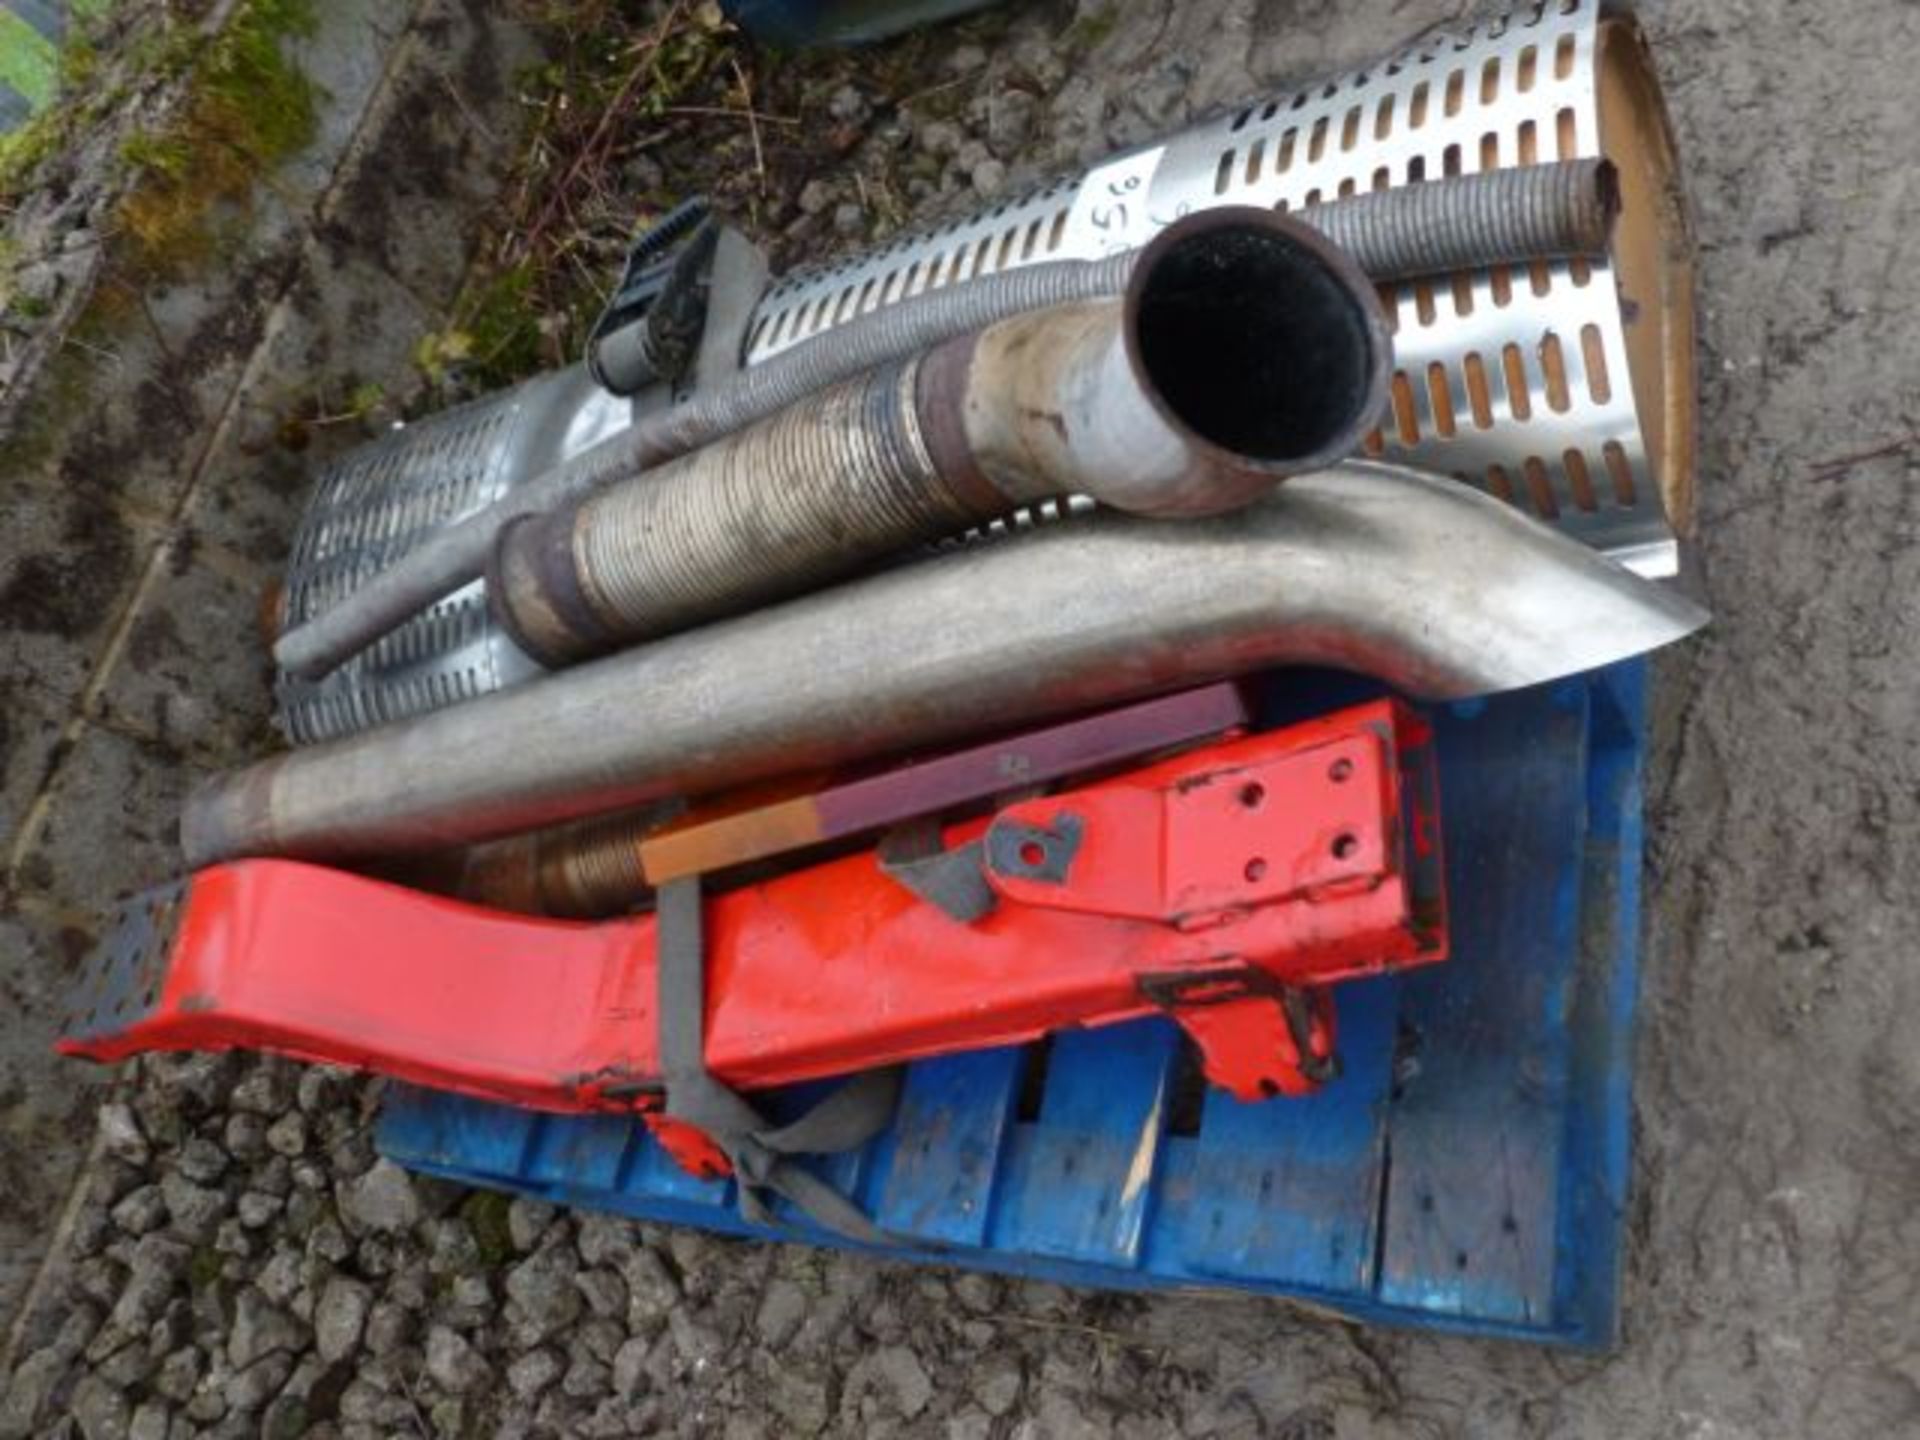 Volvo Exhaust Stack   Subcategory:Garage Tools / Sundries  V5:  Plate:  MOT: